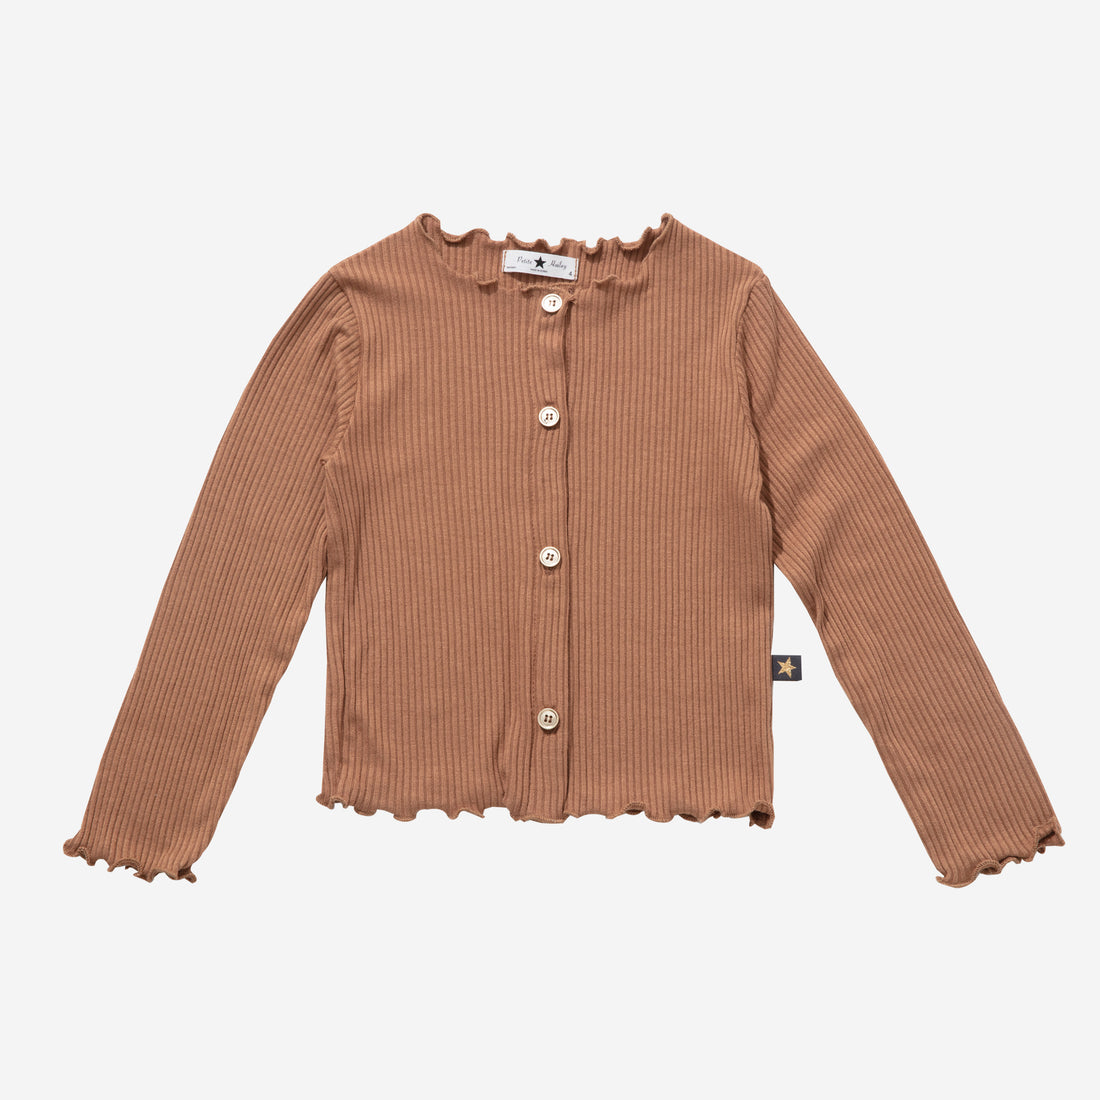 Camel, long sleeve cardigan with simple buttons.